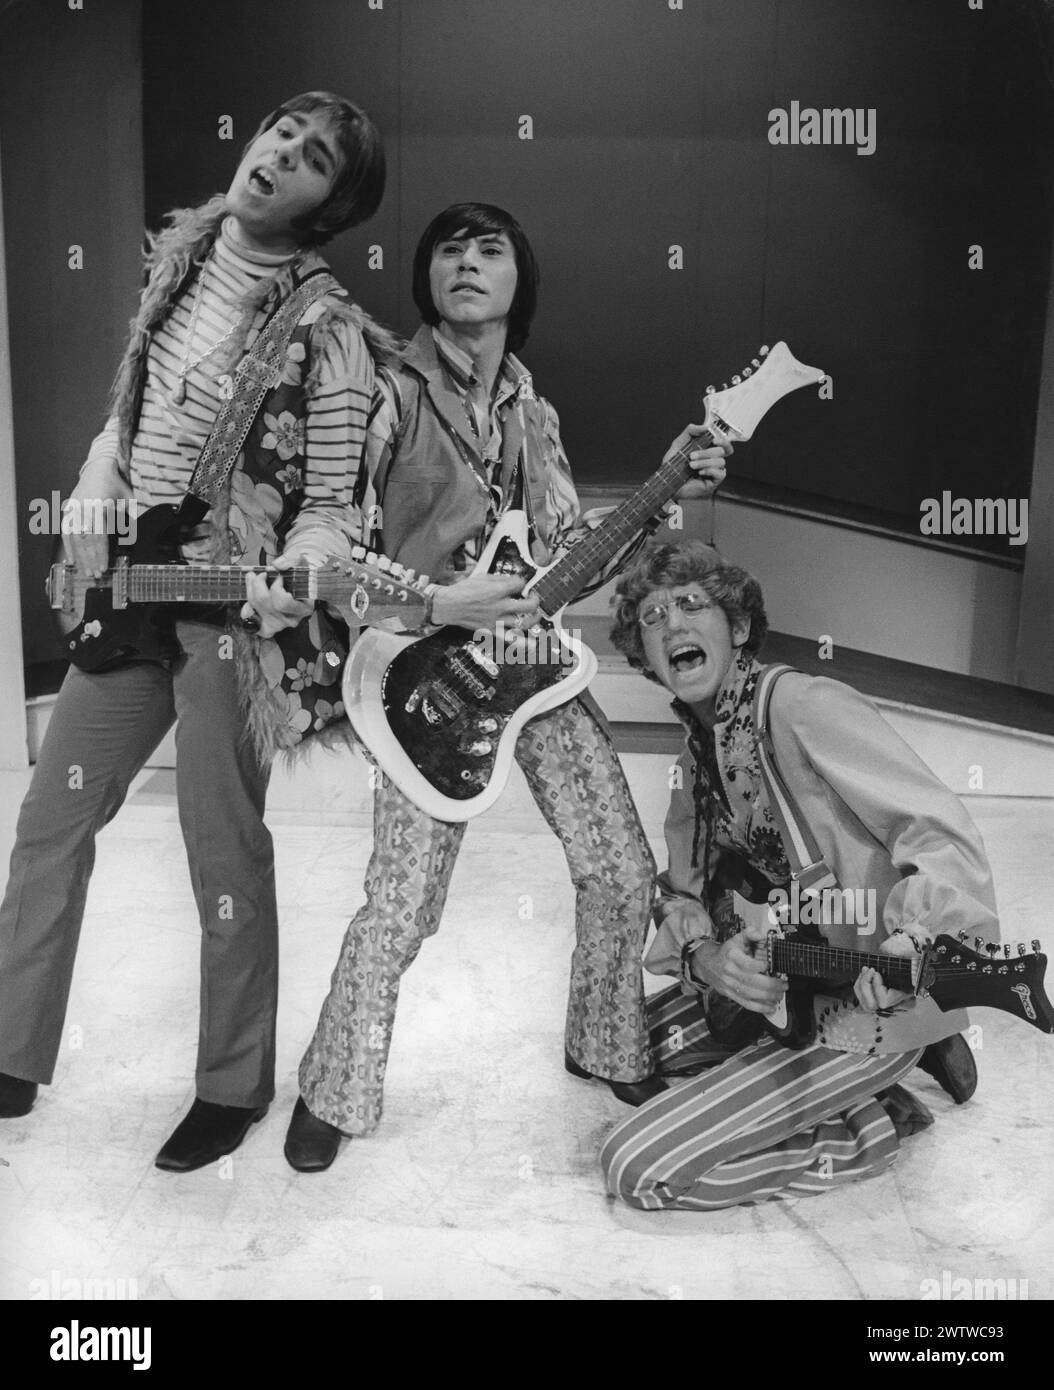 Promo shot of the rock group called The Apocalypse starring, Antony Travis, Danny Apolinar and John Kuhner performing their musical hit 'Your Own Thing', at the Huntington Hartford Theater. The guys are dressed in wild looking clothes including bell bottoms, stripes, plaids and fur Stock Photo